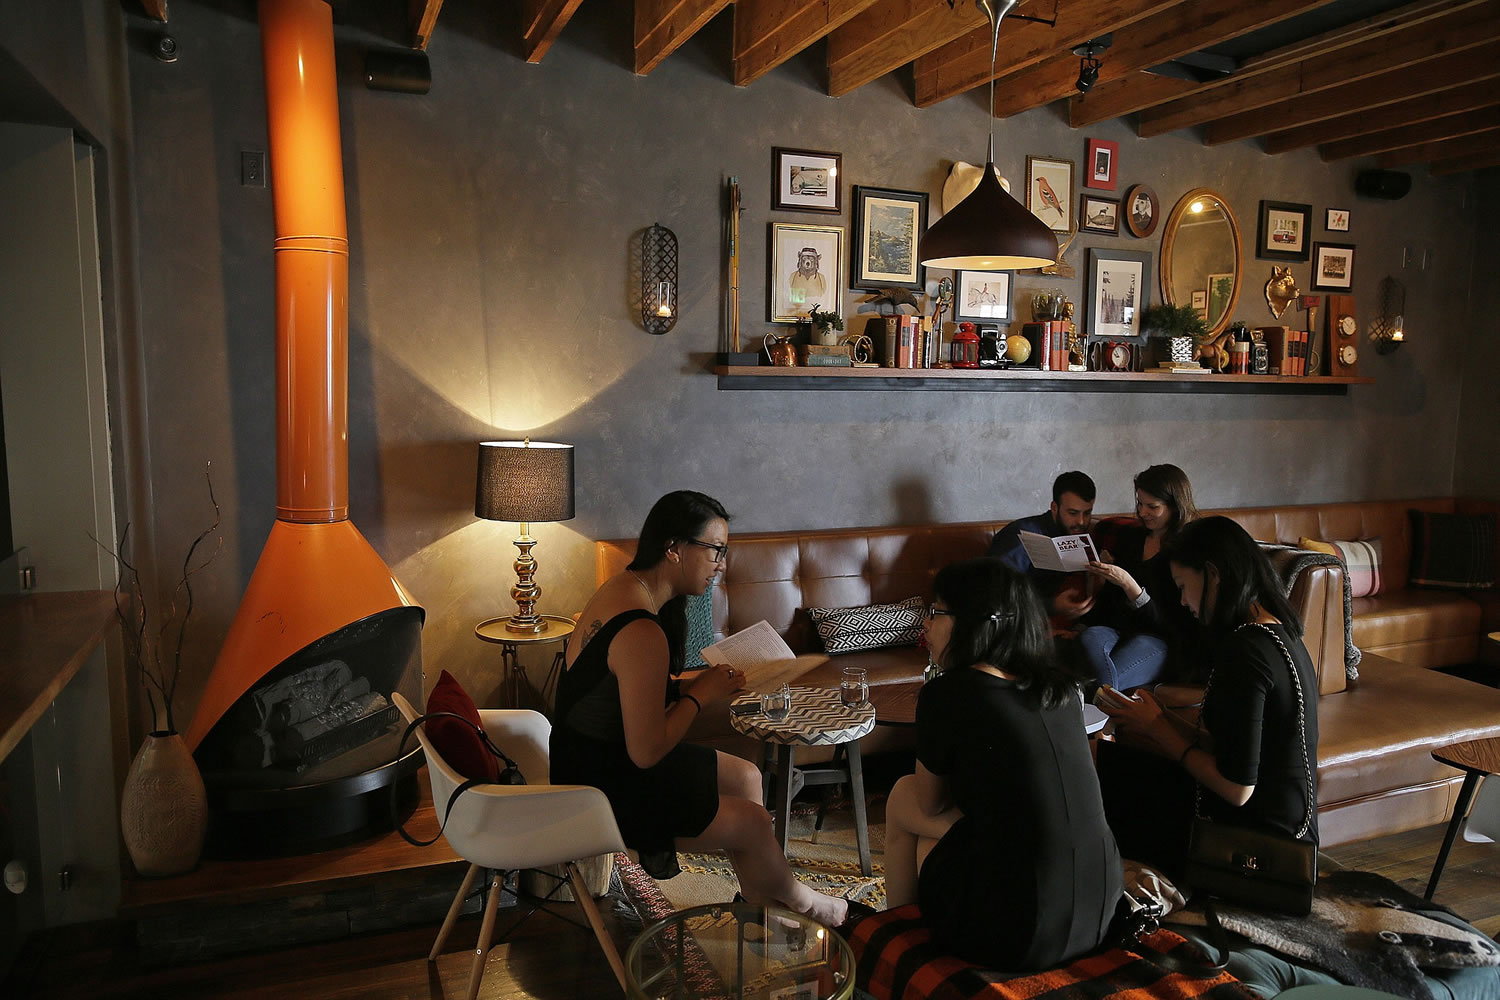 Ticketed diners look over menus in an upstairs lounge at the Lazy Bear restaurant in San Francisco. Lazy Bear uses an increasingly popular ticketing system model for its &quot;reservations&quot; that asks diners to pay up front for their meals much the way theater patrons pay for their seats.